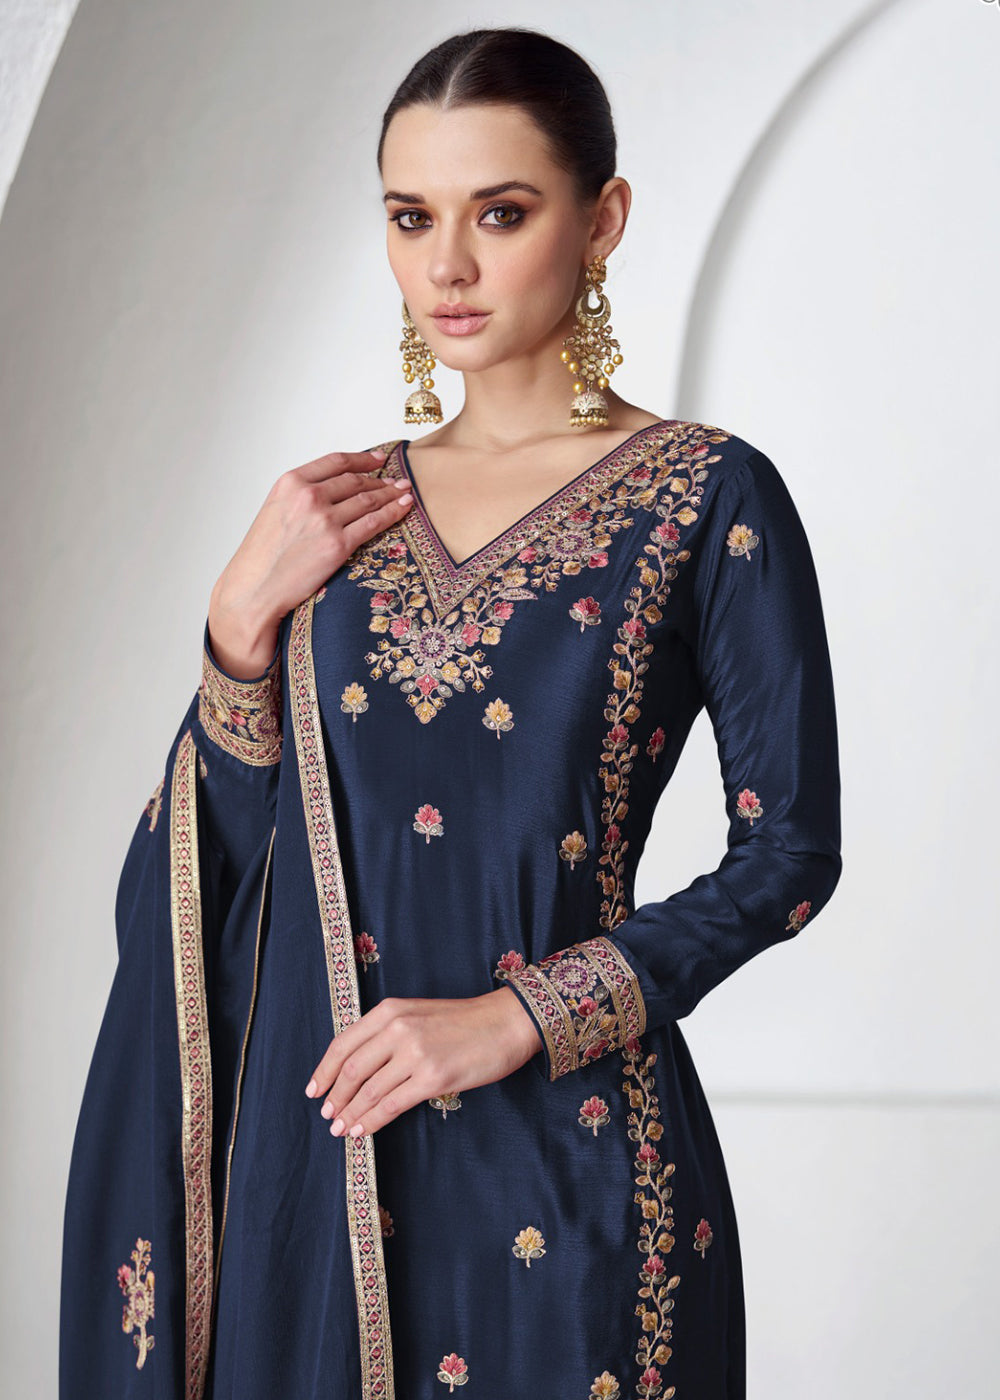 Buy Now Palazzo Style Premium Chinnon Silk Navy Blue Festive Suit Online in USA, UK, Canada, Germany, Australia & Worldwide at Empress Clothing.